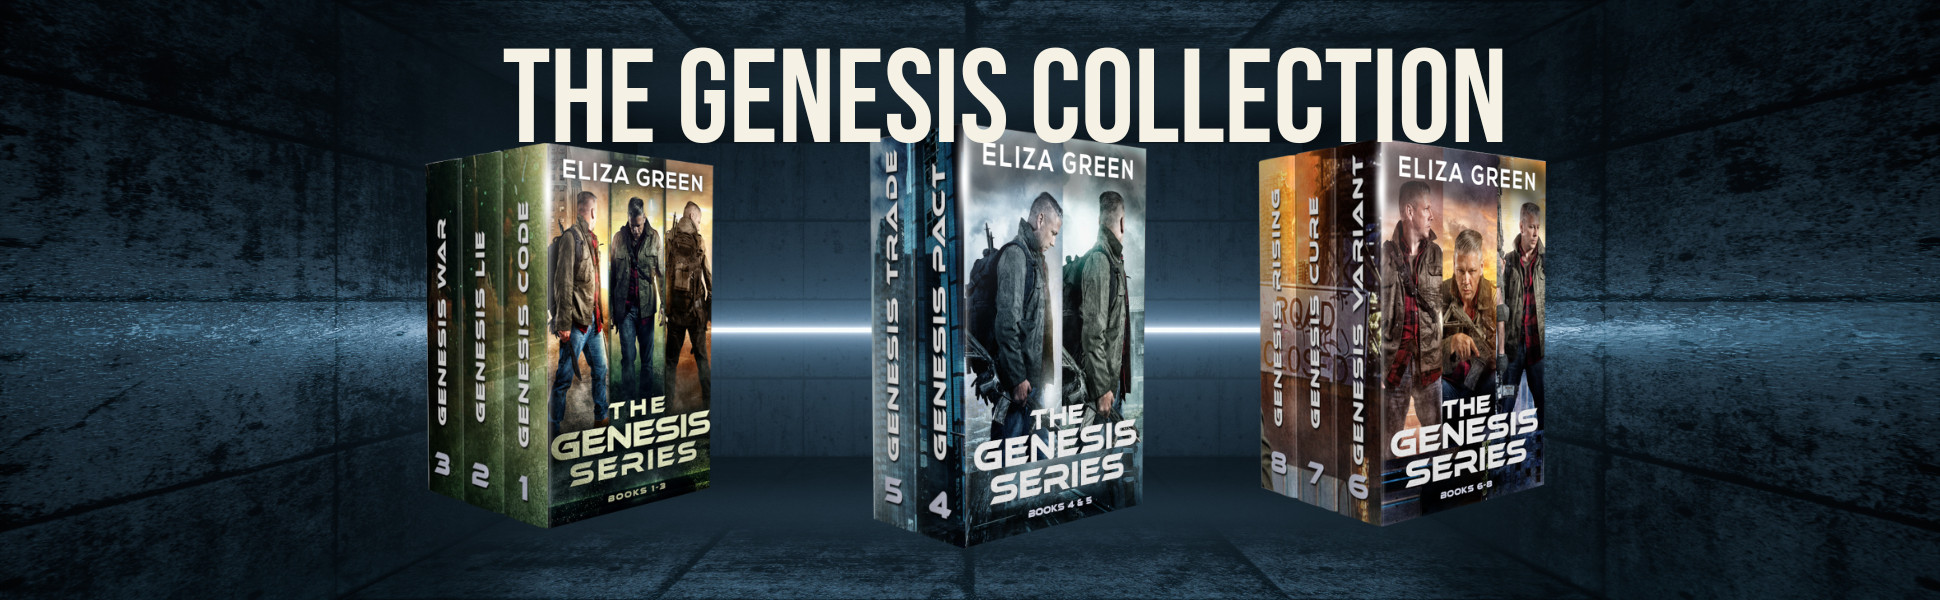 genesis collection series page